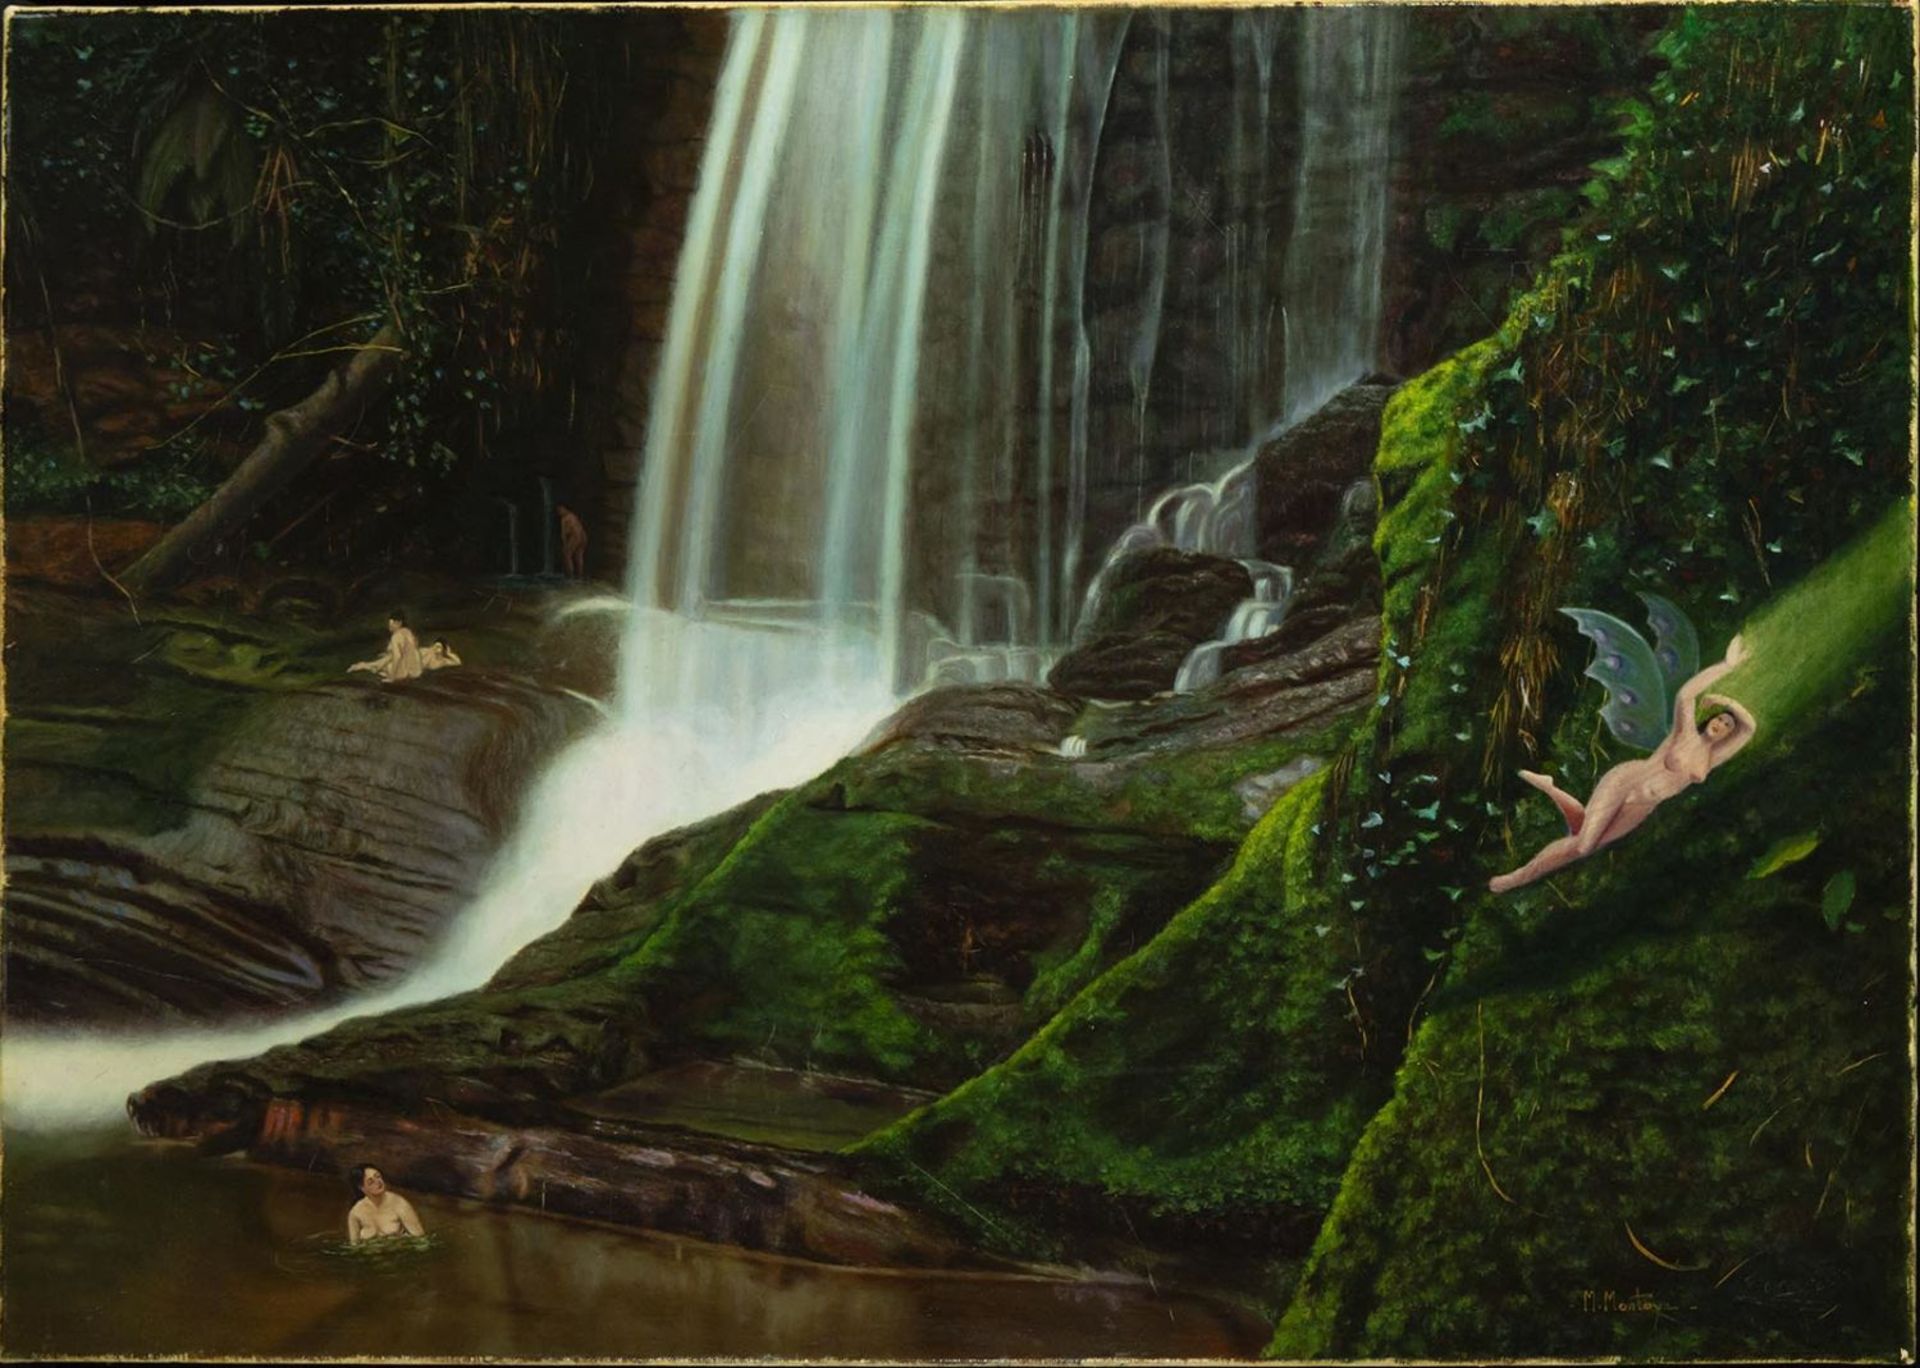 Landscape with Waterfall and Nymph, Manolo Montoya, 20th century